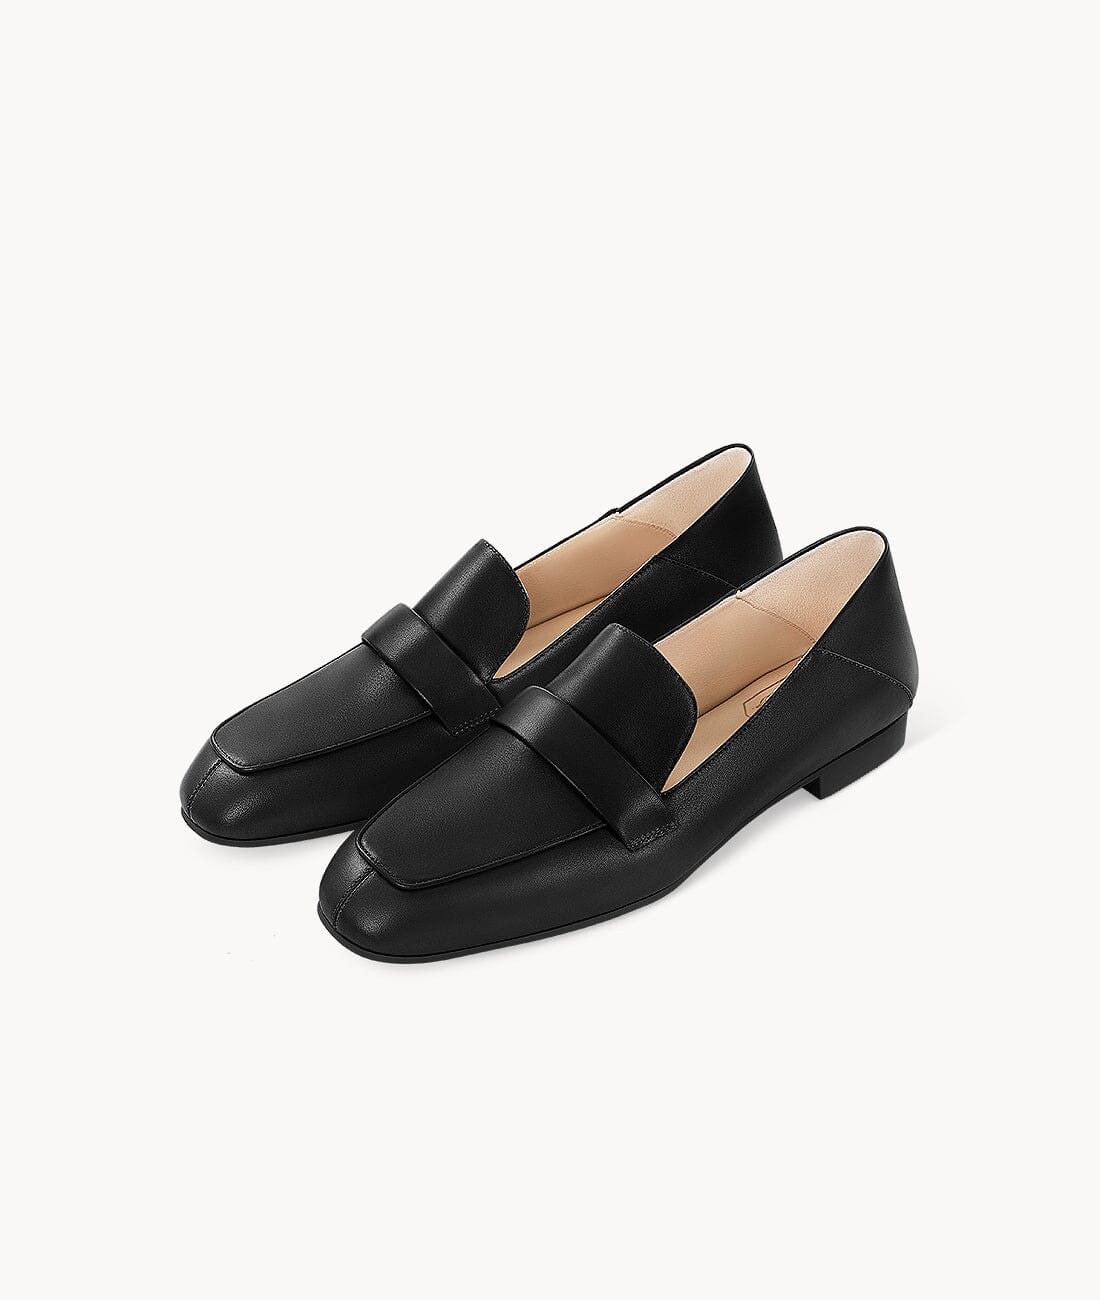 7or9 - Black Choc Bread - Flats&Loafers